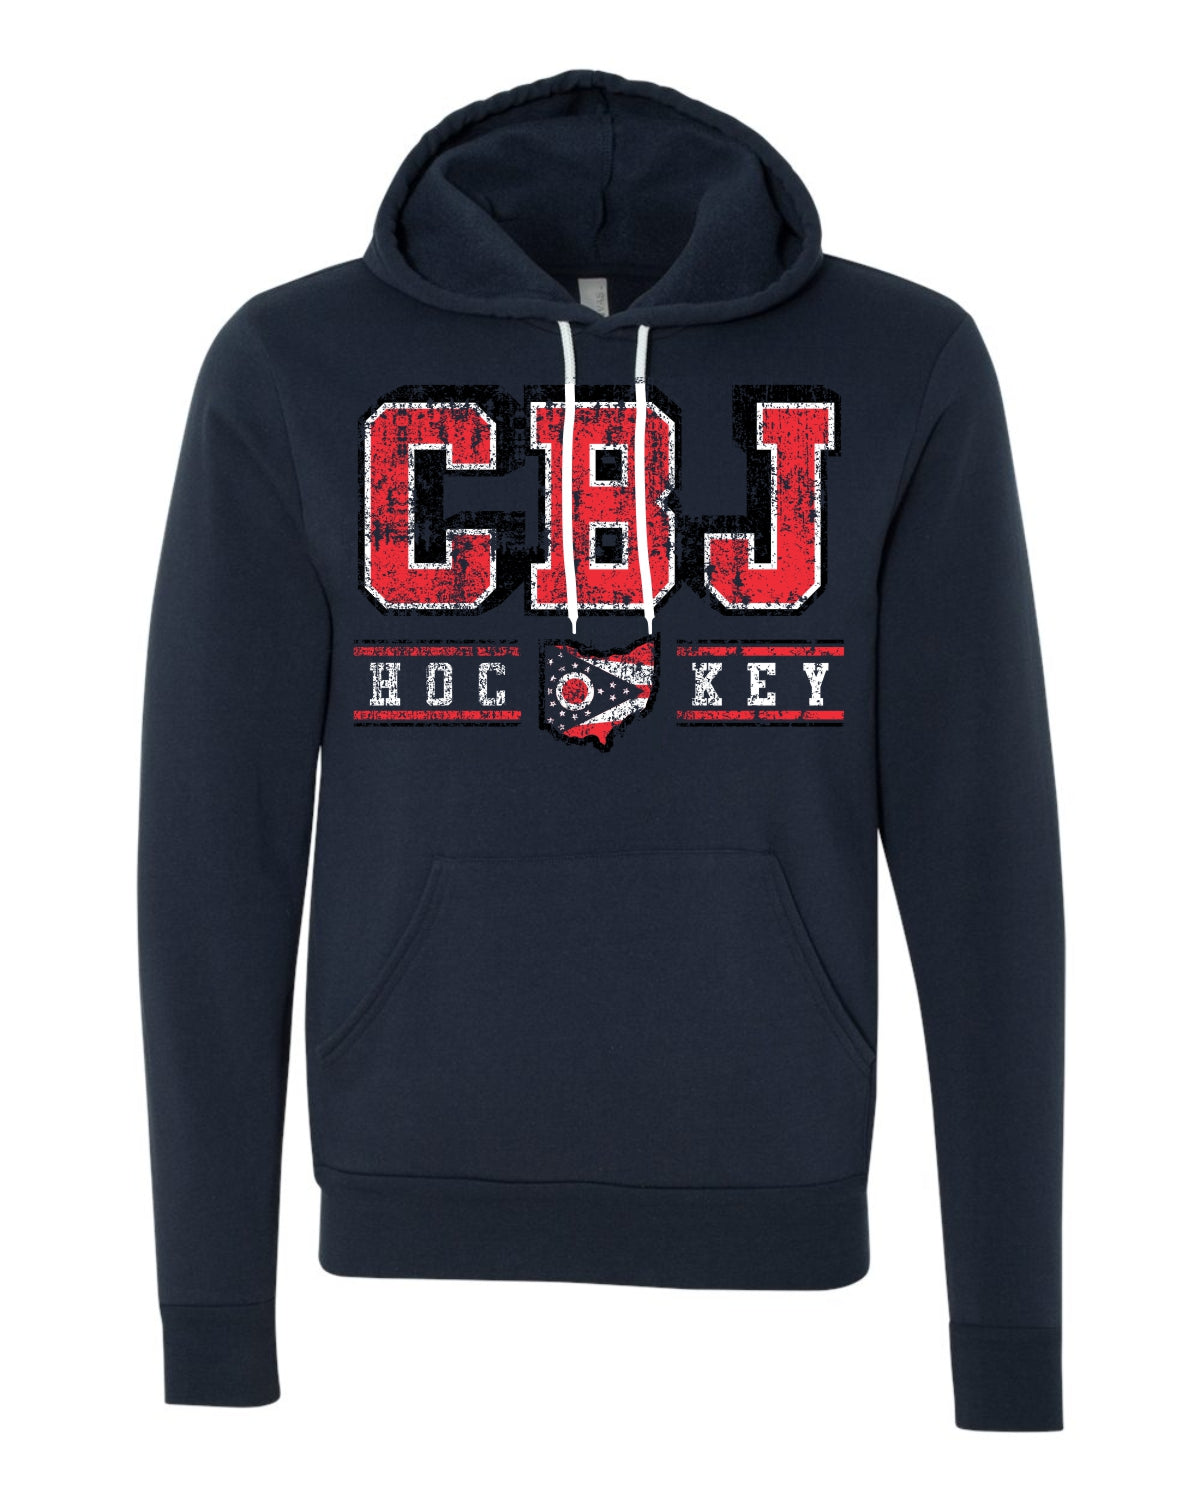 Cbj Clothing for Sale